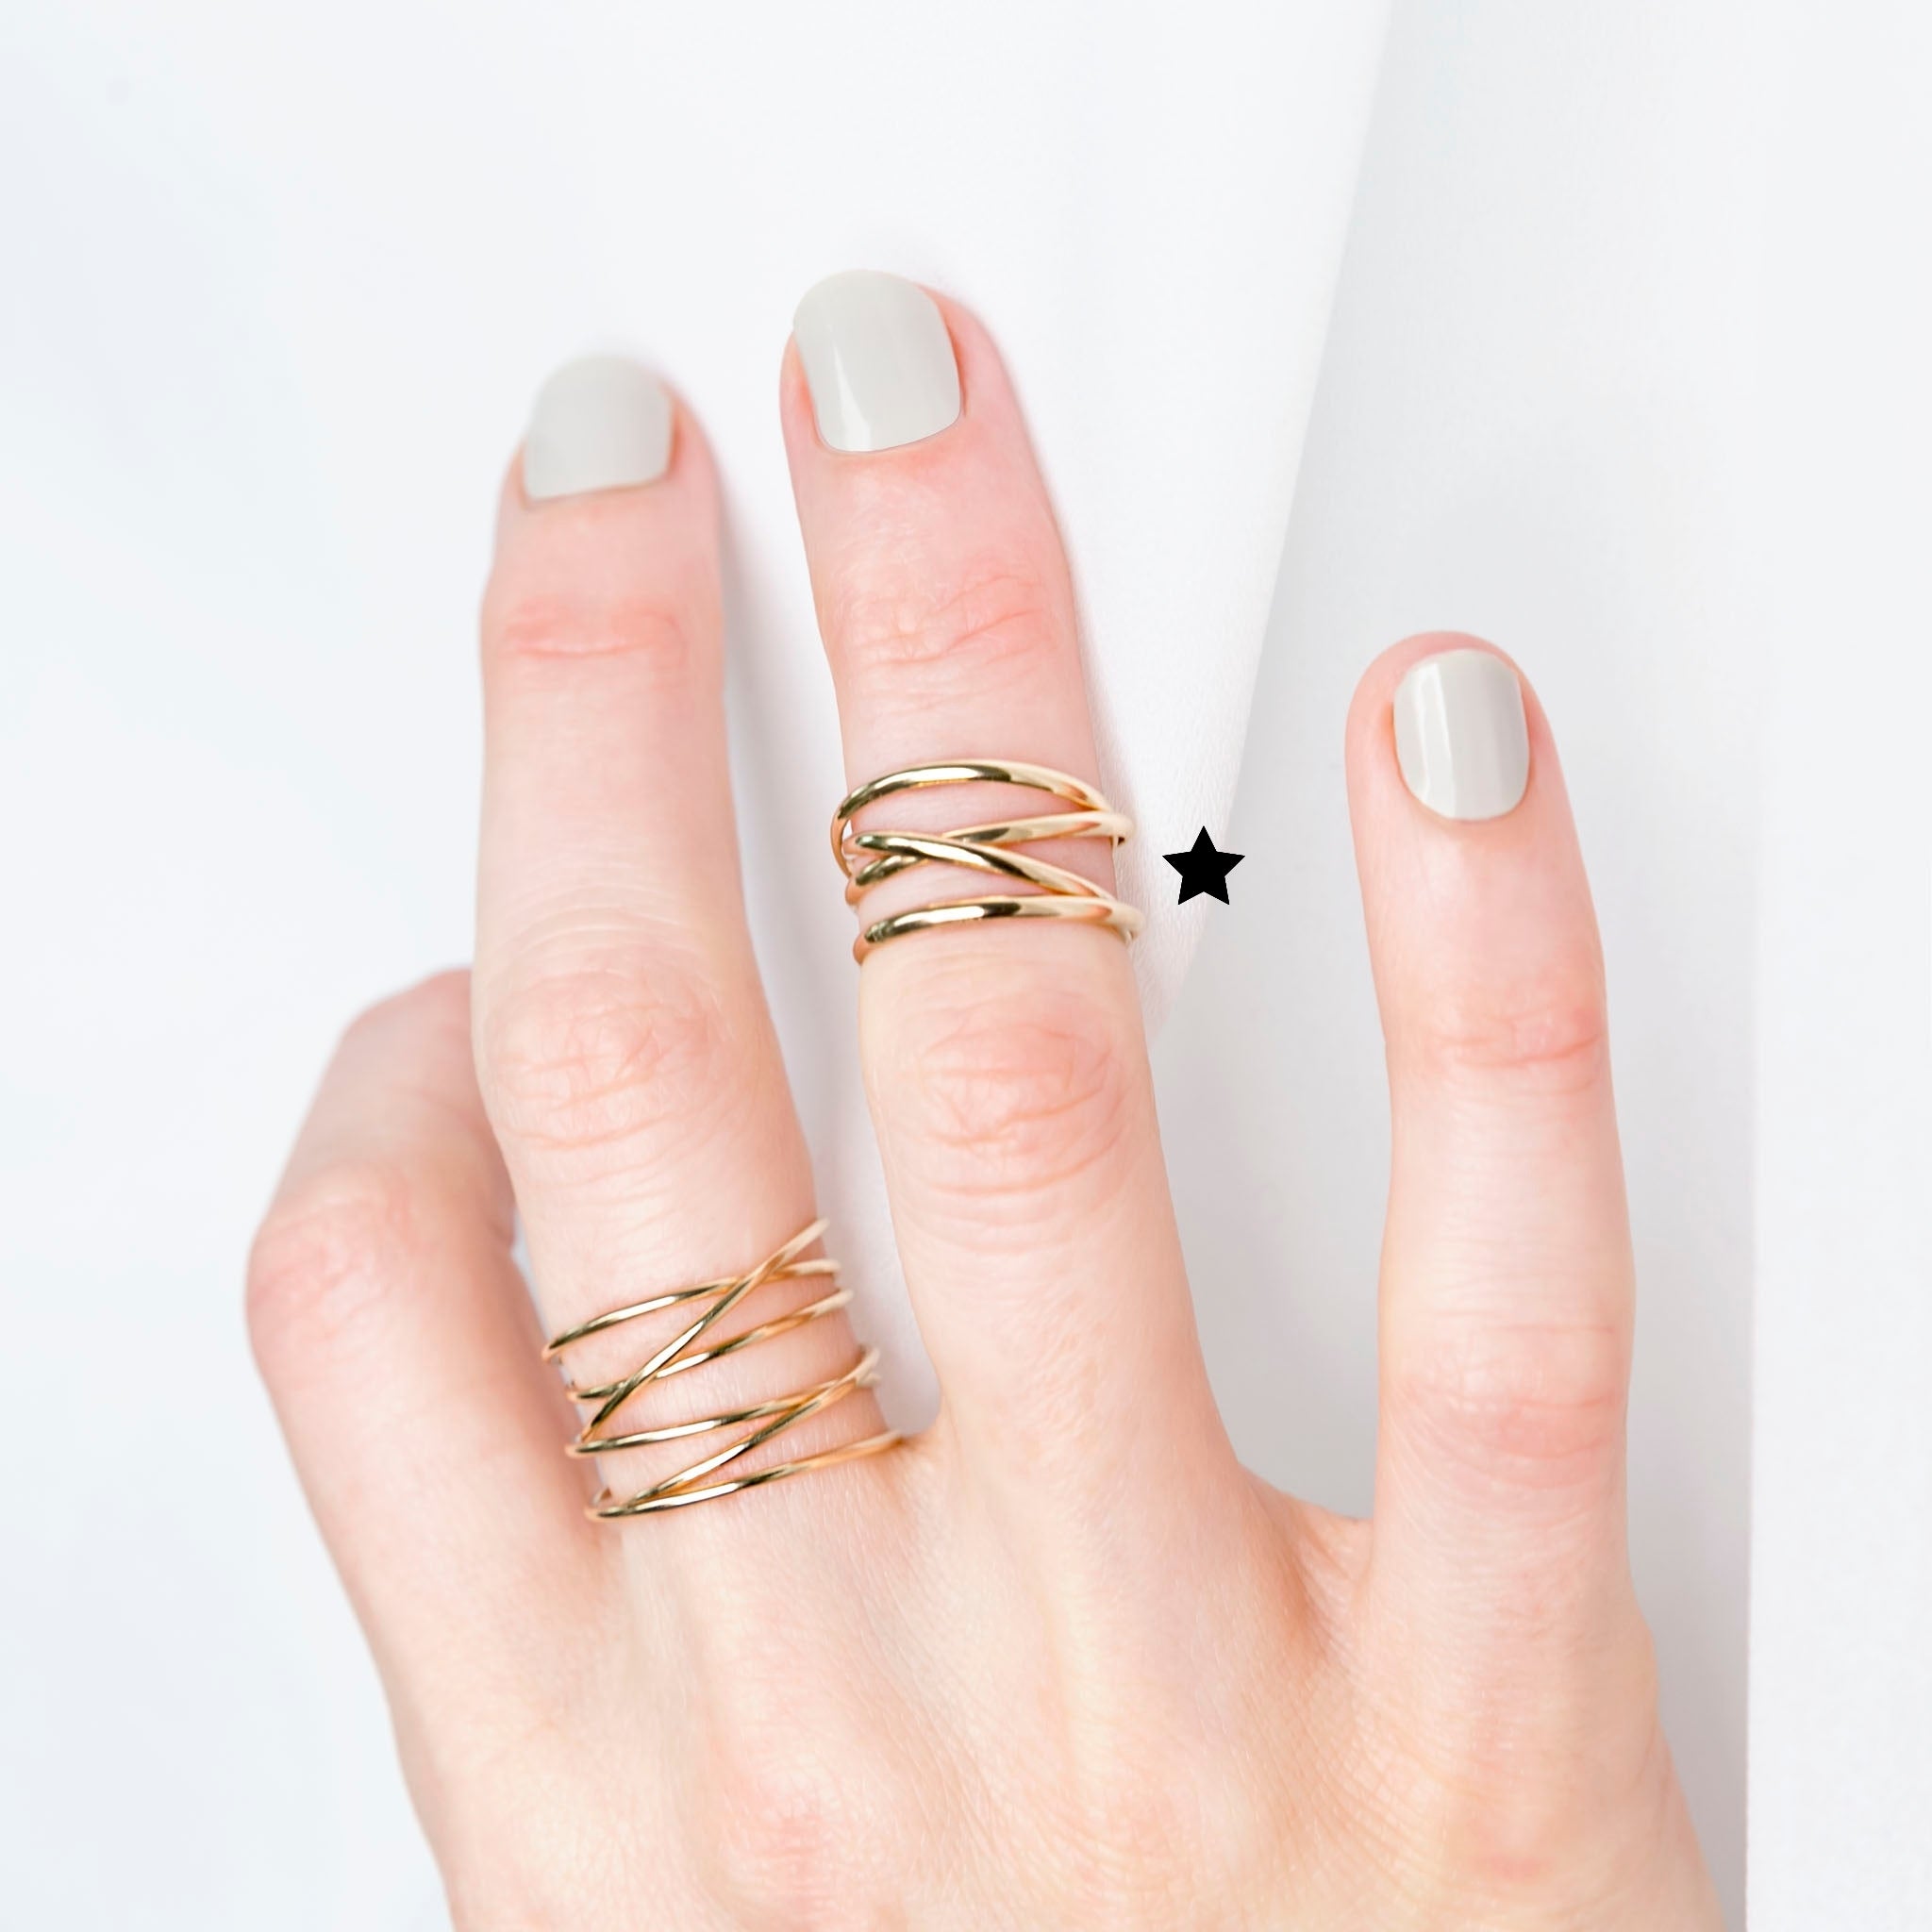 The Chunky Gold Rings You Didn't Know You Needed for Summer